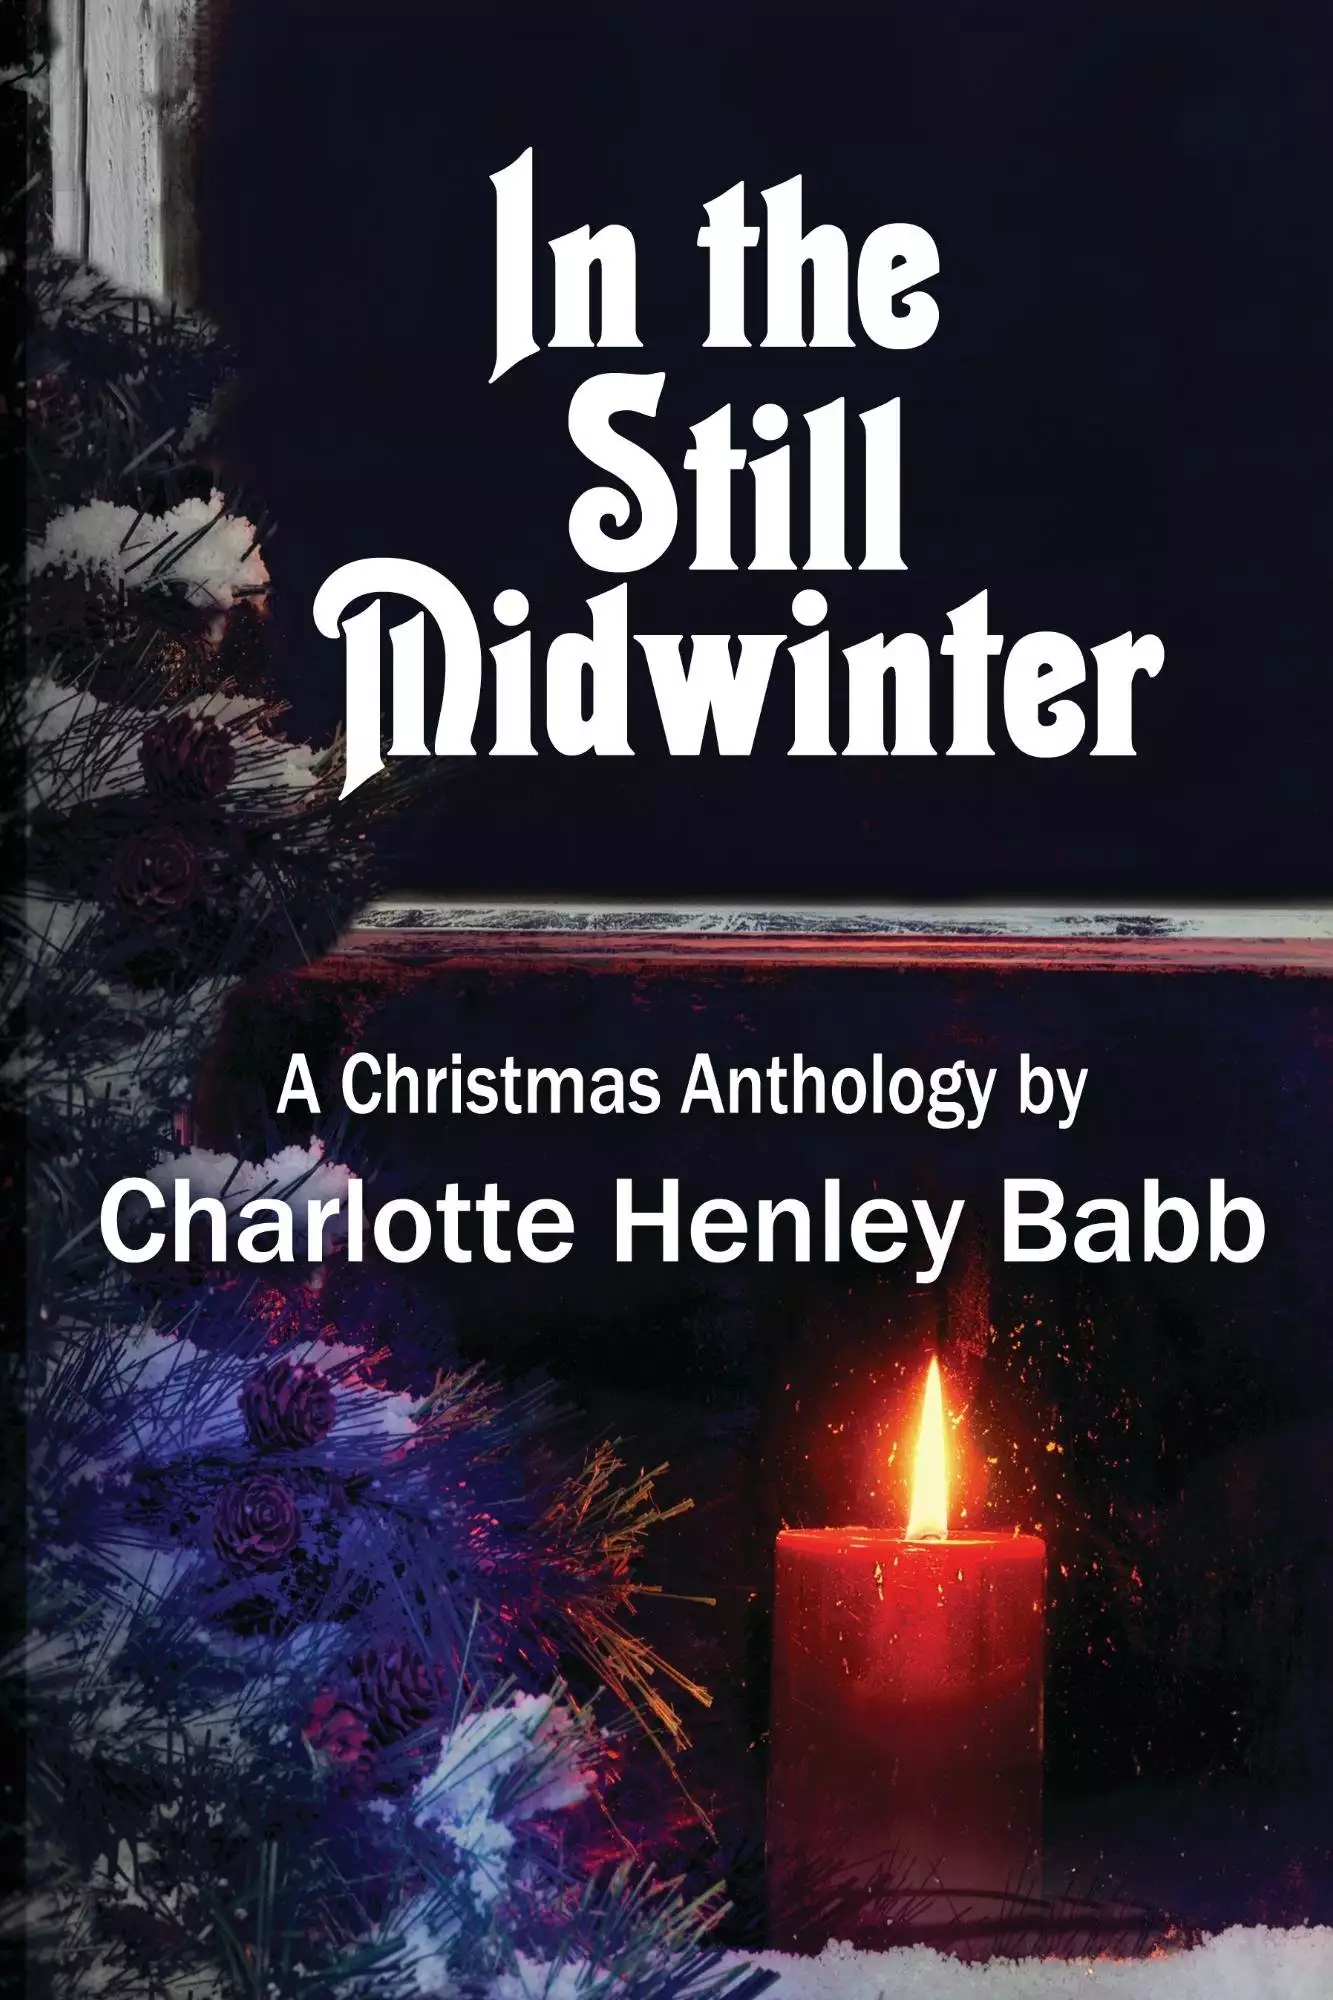 In the Still Midwinter: A Christmas Anthology